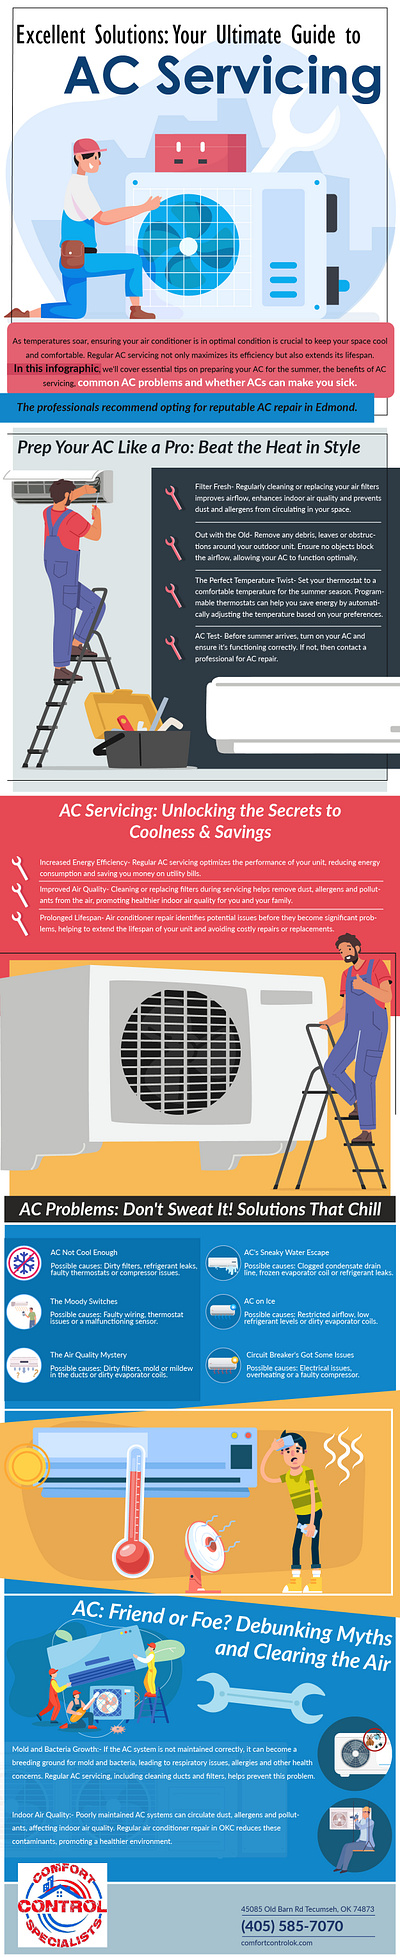 Excellent Solutions: Your Ultimate Guide to AC Servicing ac repairing